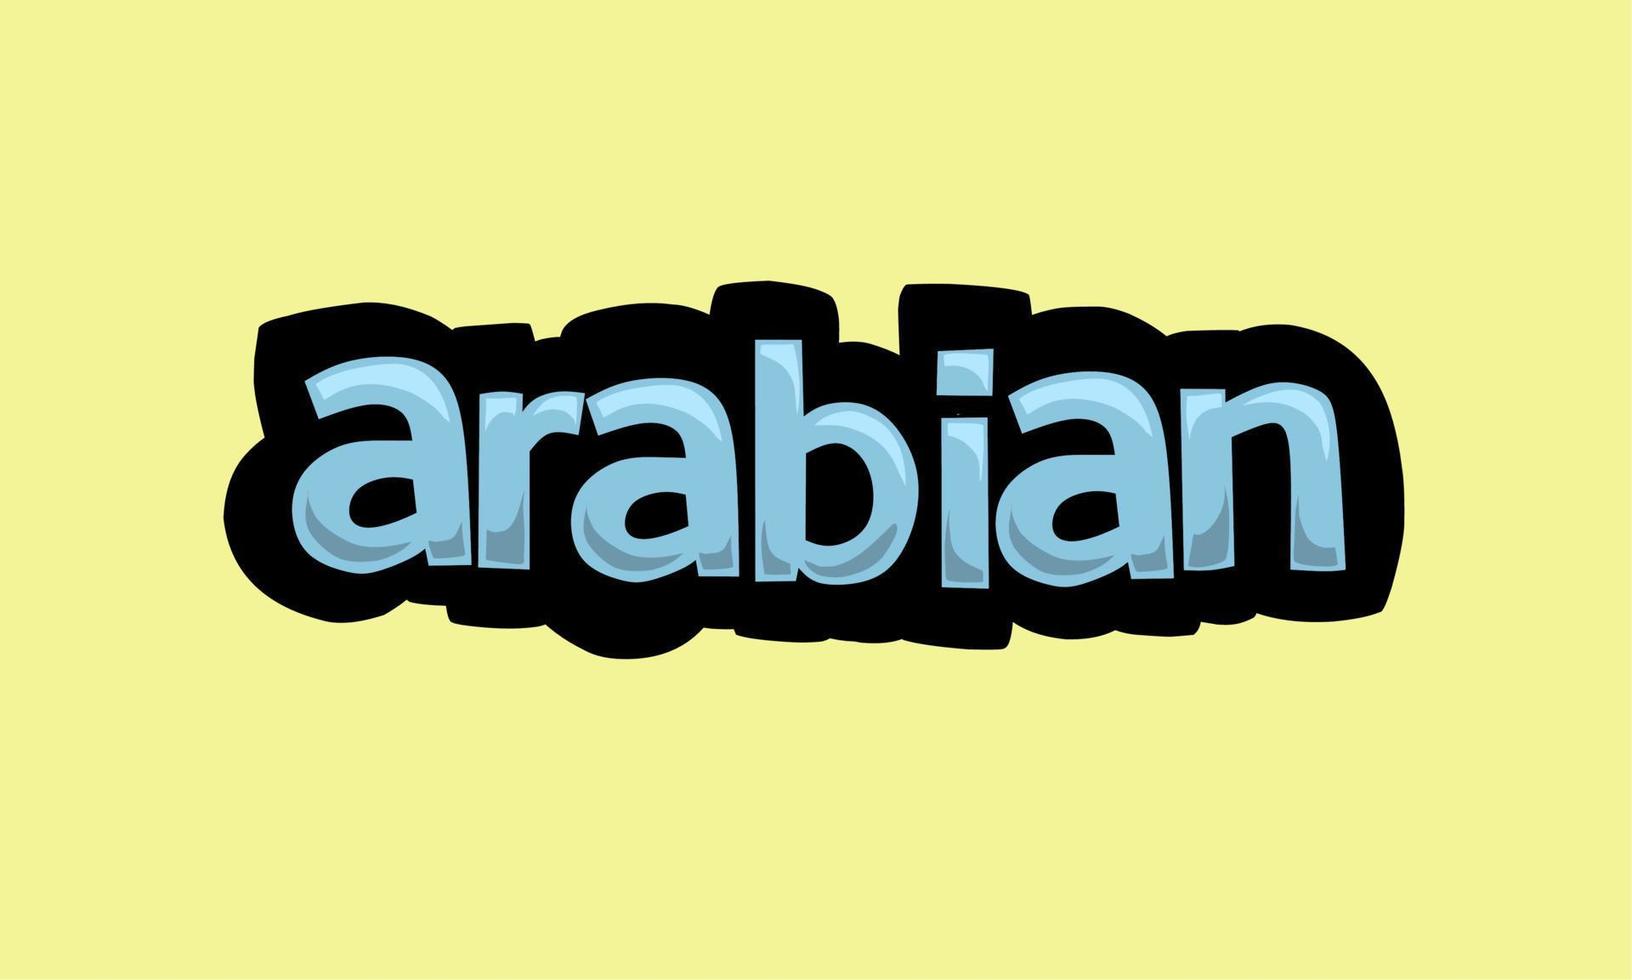 ARABIAN writing vector design on a yellow background